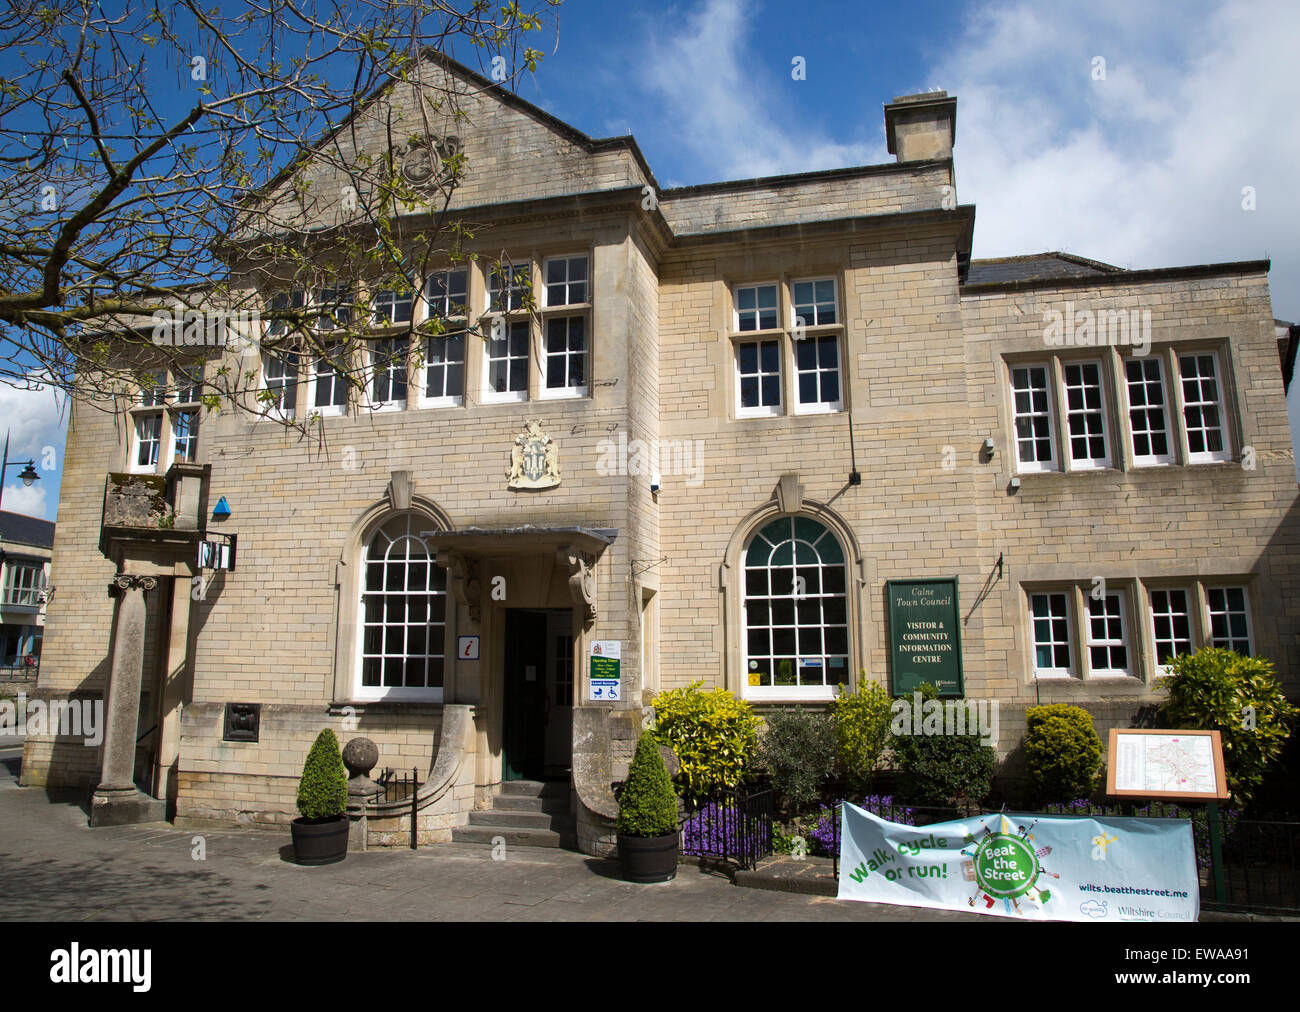 Town Hall building, Calne, Wiltshire, England, UK Stock Photo